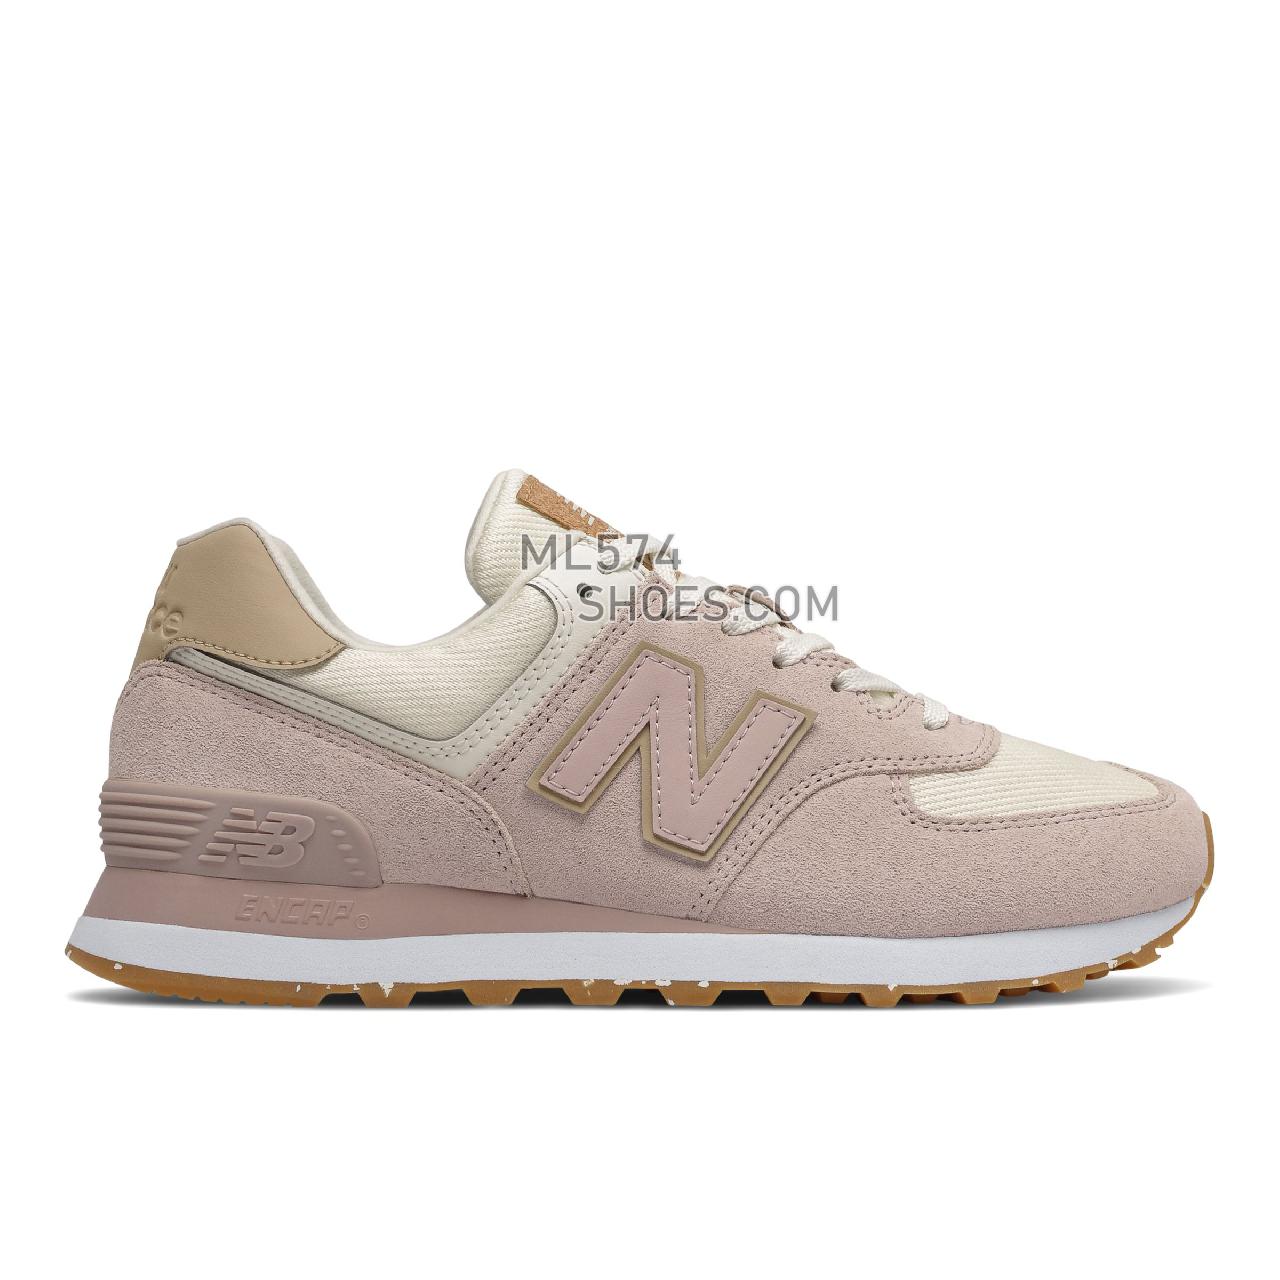 New Balance 574 - Women's Classic Sneakers - Space Pink with Angora - WL574SP2